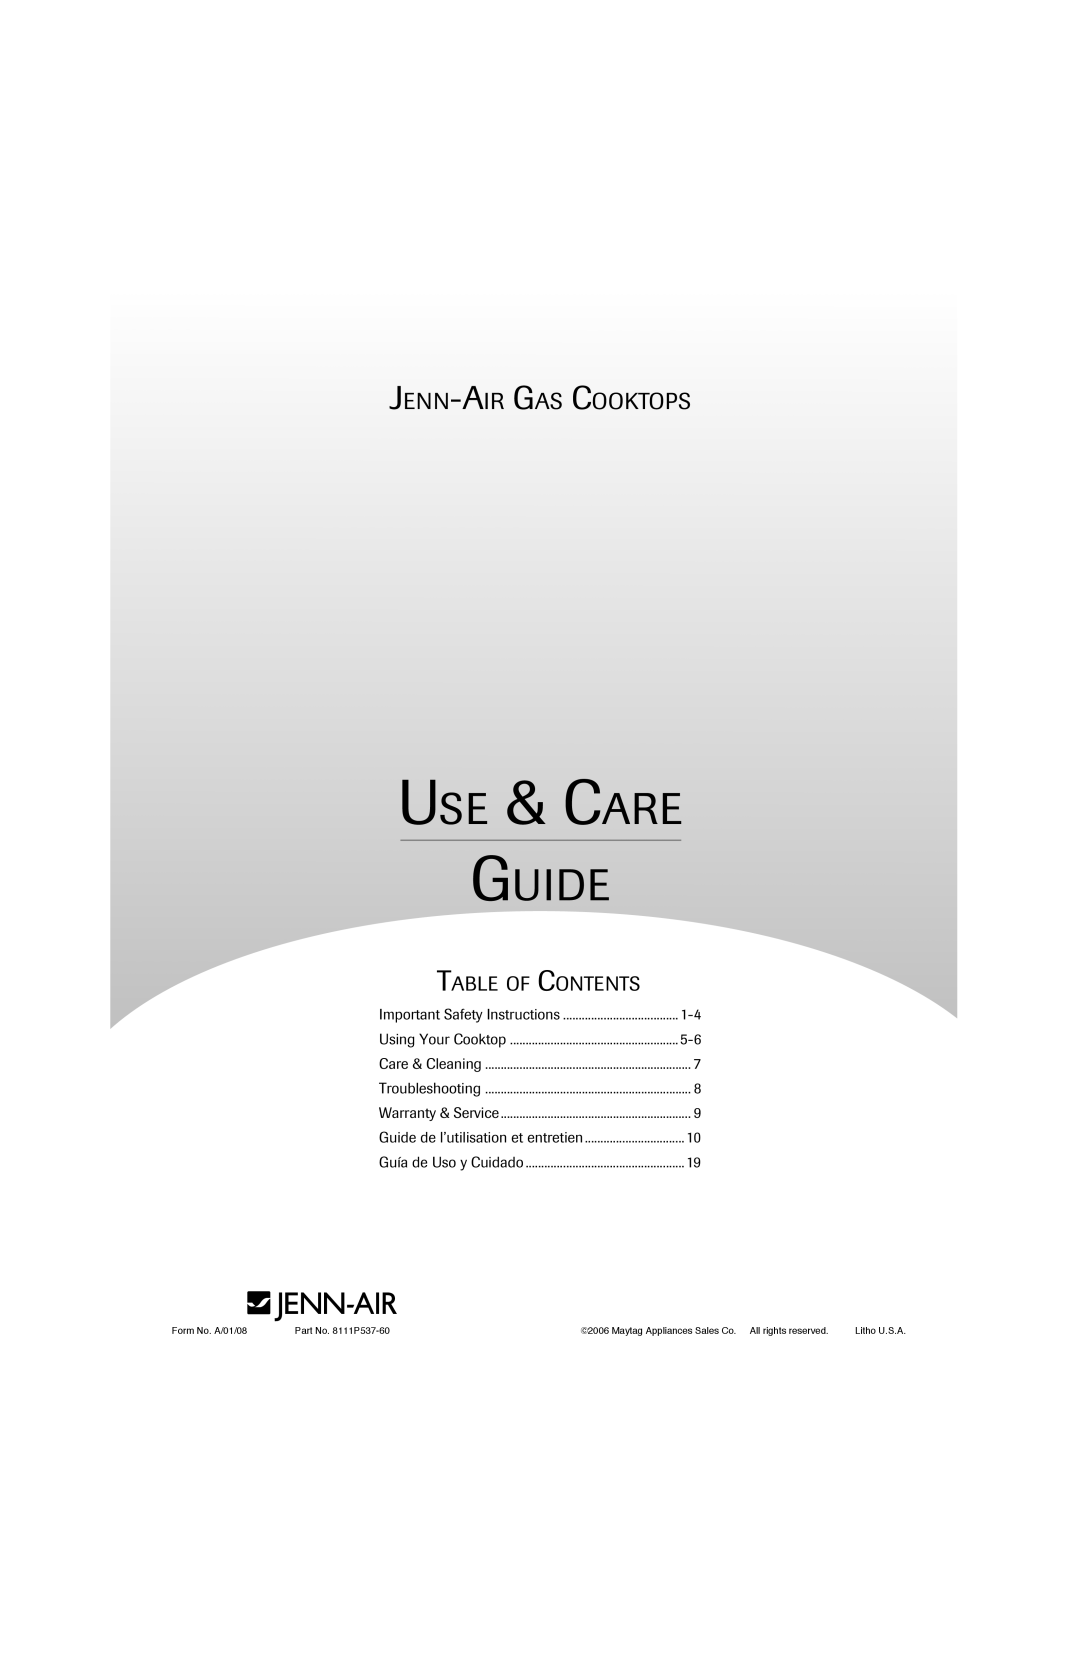 Jenn-Air important safety instructions Use & Care Guide, Jenn-Air Gas Cooktops, Table Of Contents, Form No. A/01/08 